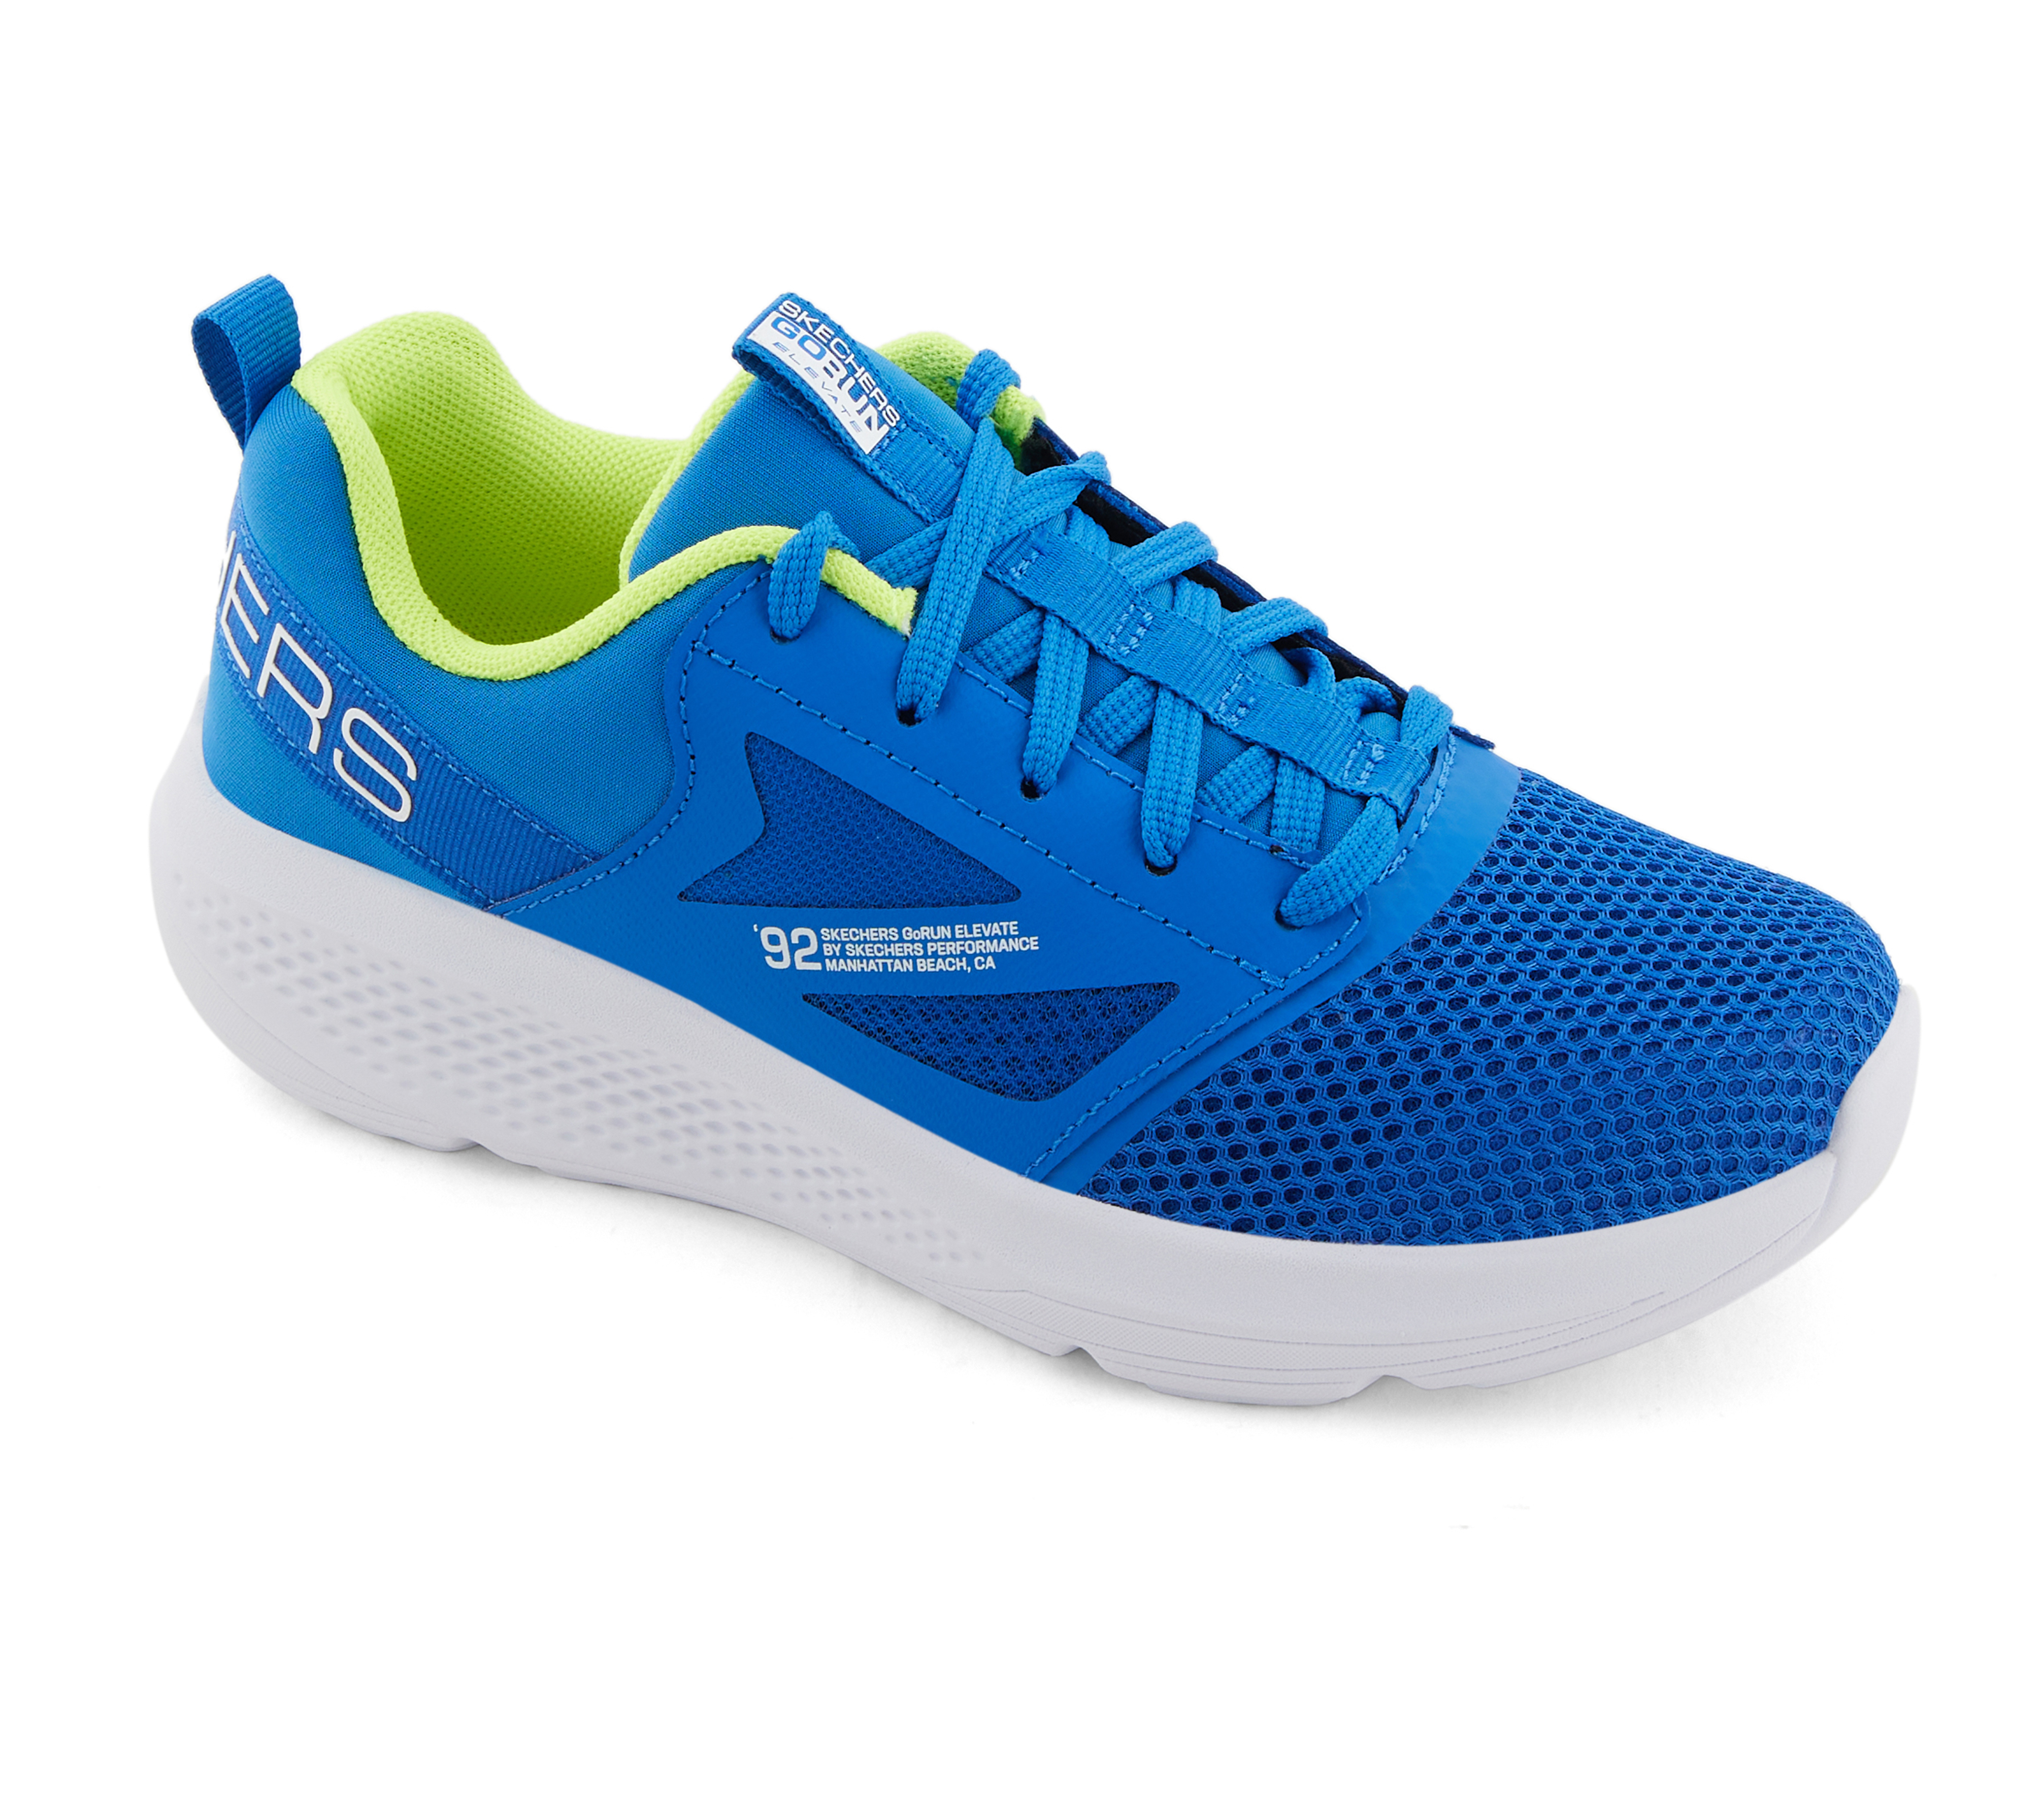 GO RUN ELEVATE - CIPHER, BLUE/LIME Footwear Lateral View